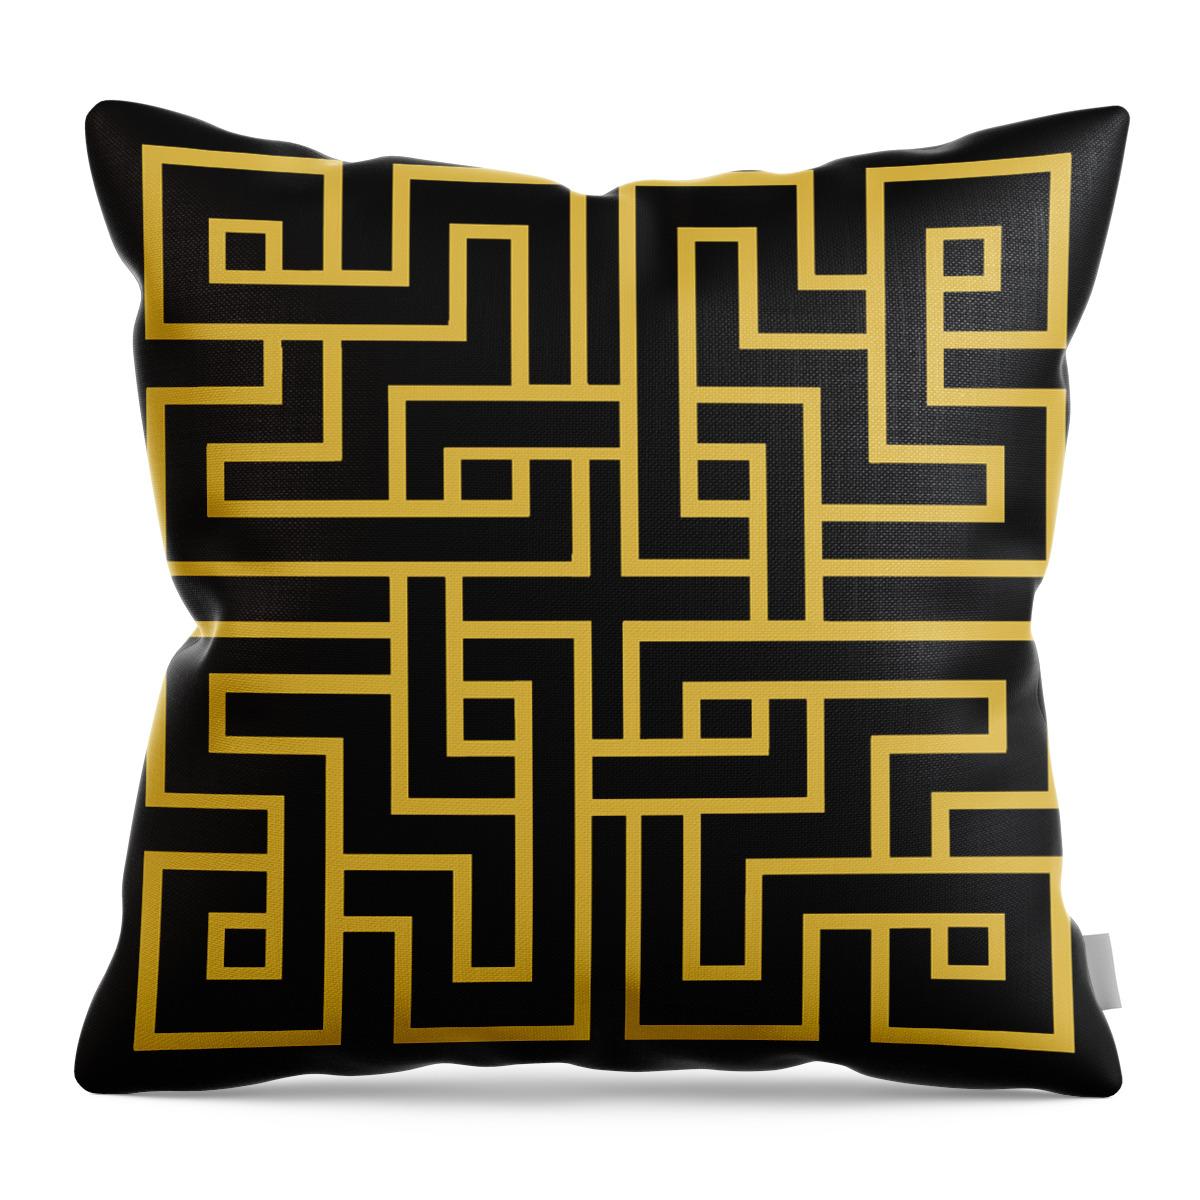 Gold Geo 6 Throw Pillow featuring the digital art Gold Geo 6 by Chuck Staley